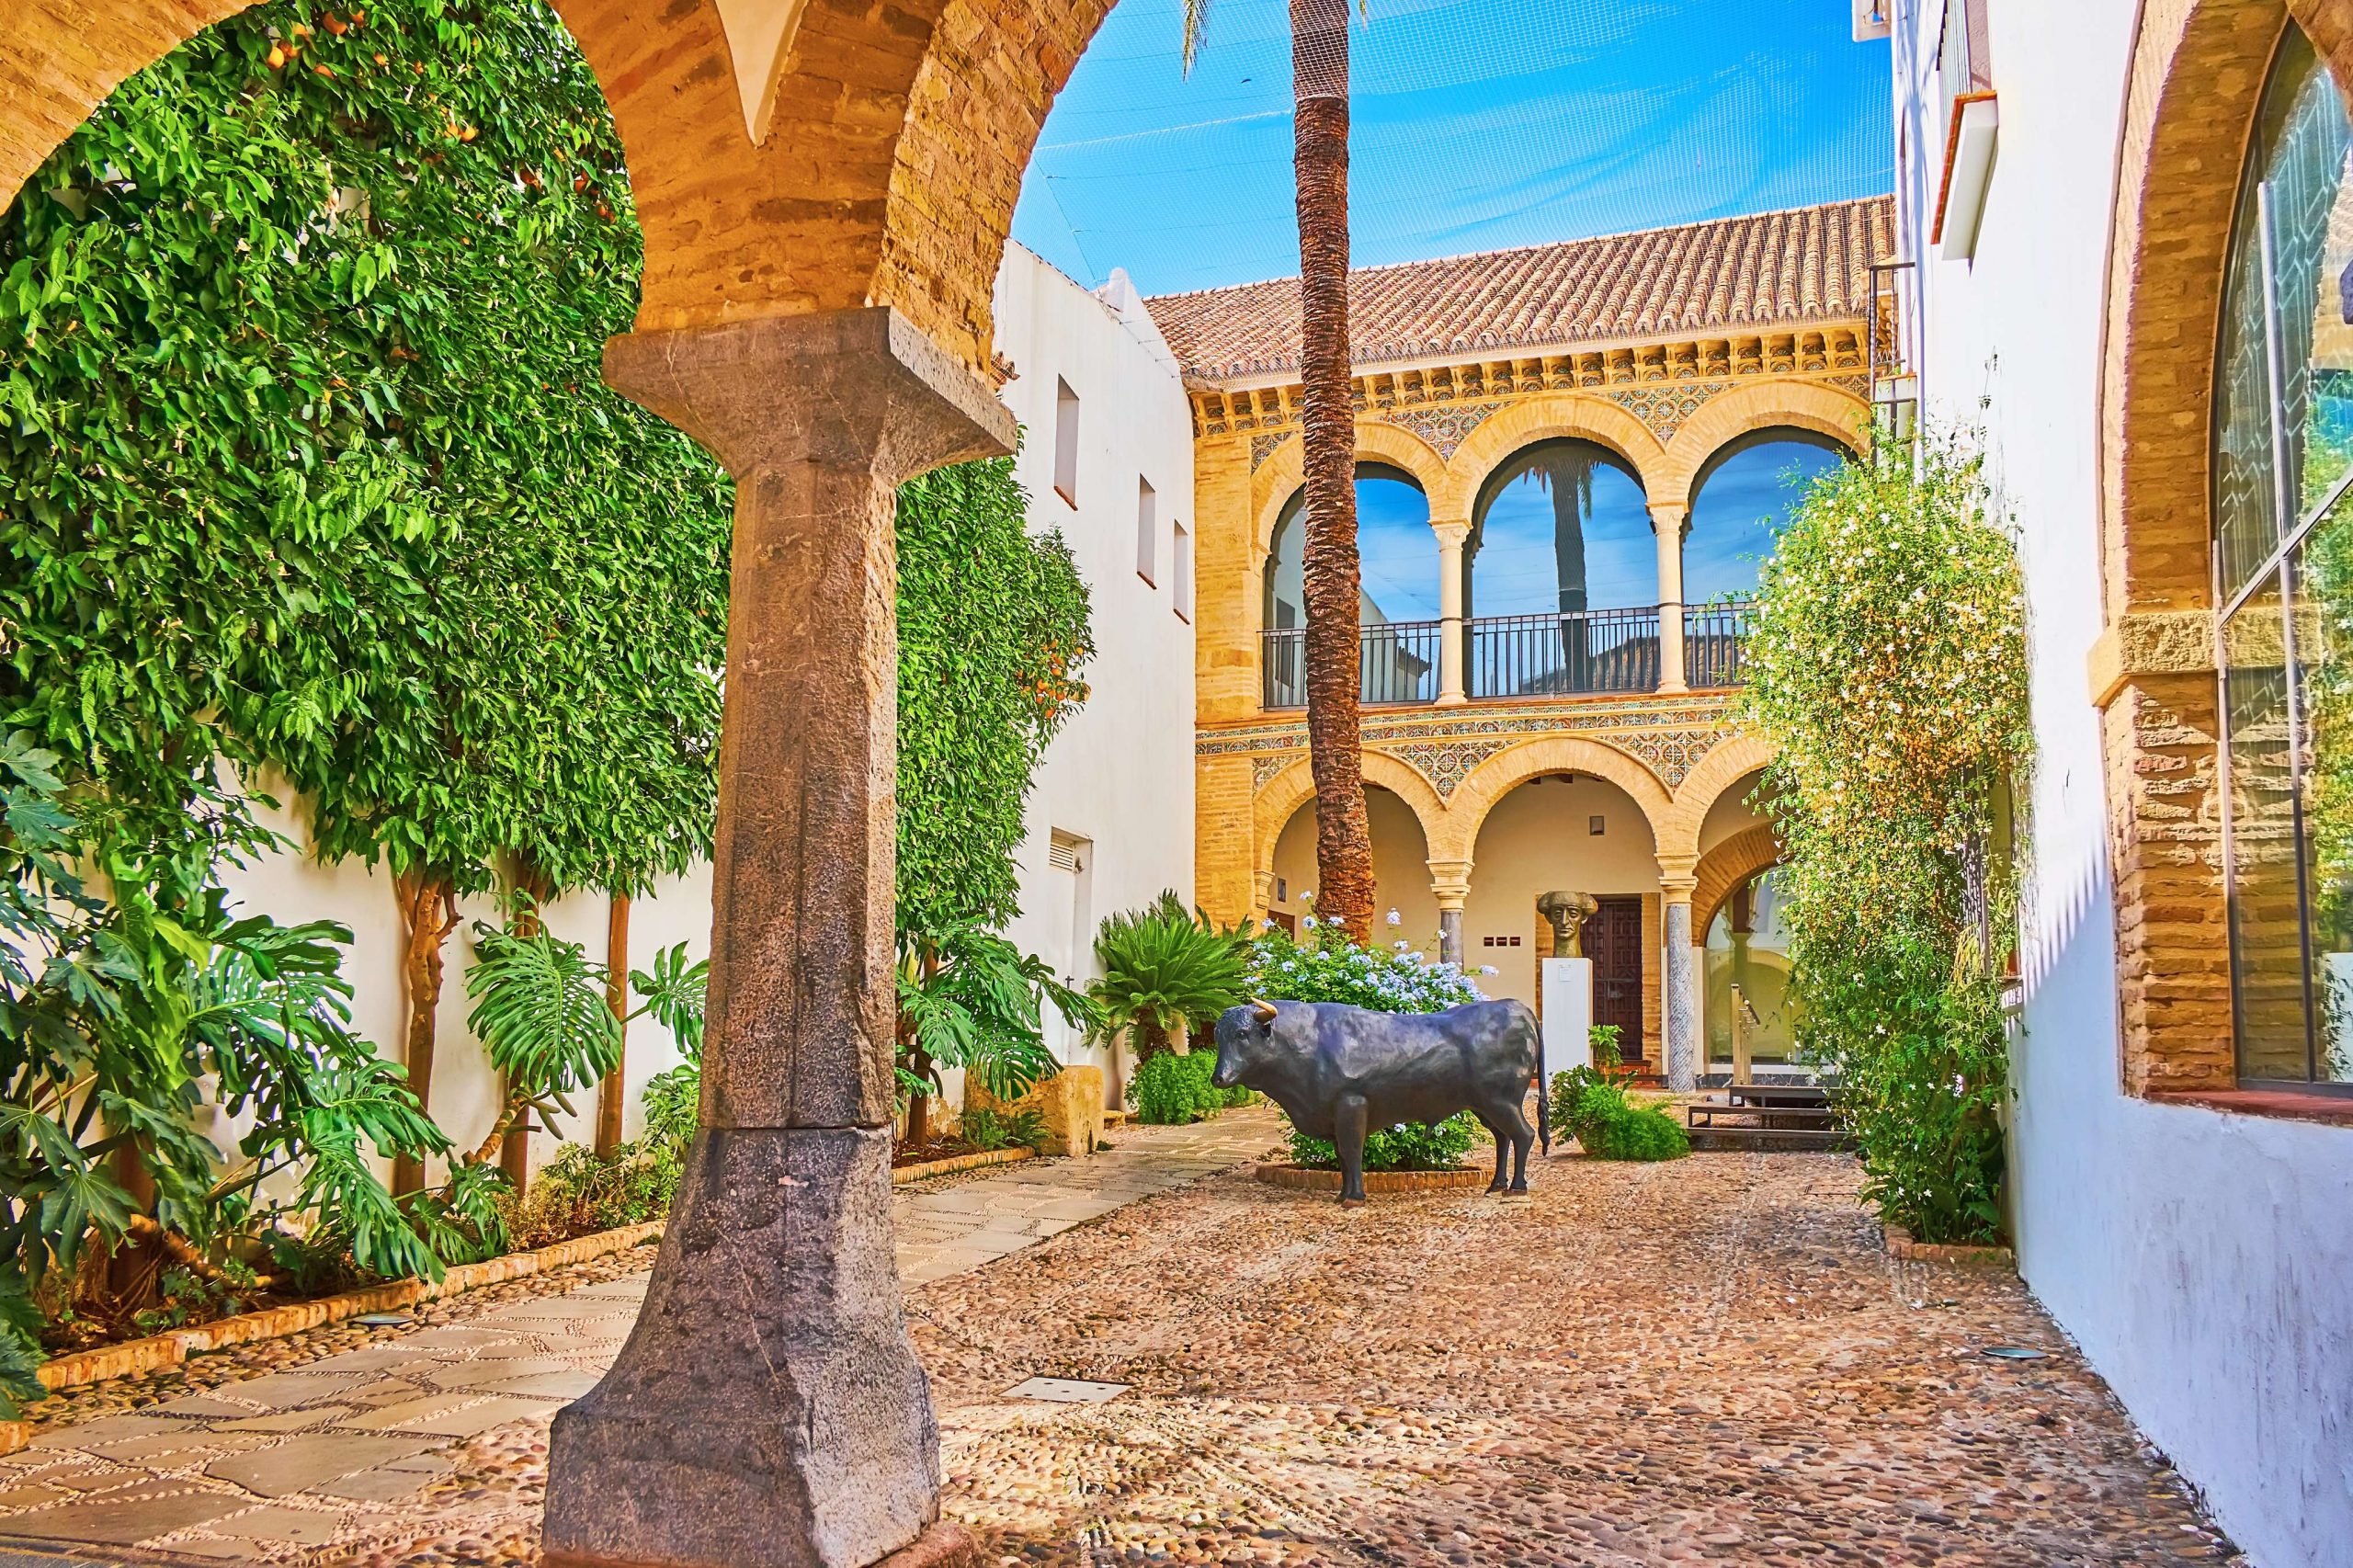 Opening hours of museums and monuments in Cordoba